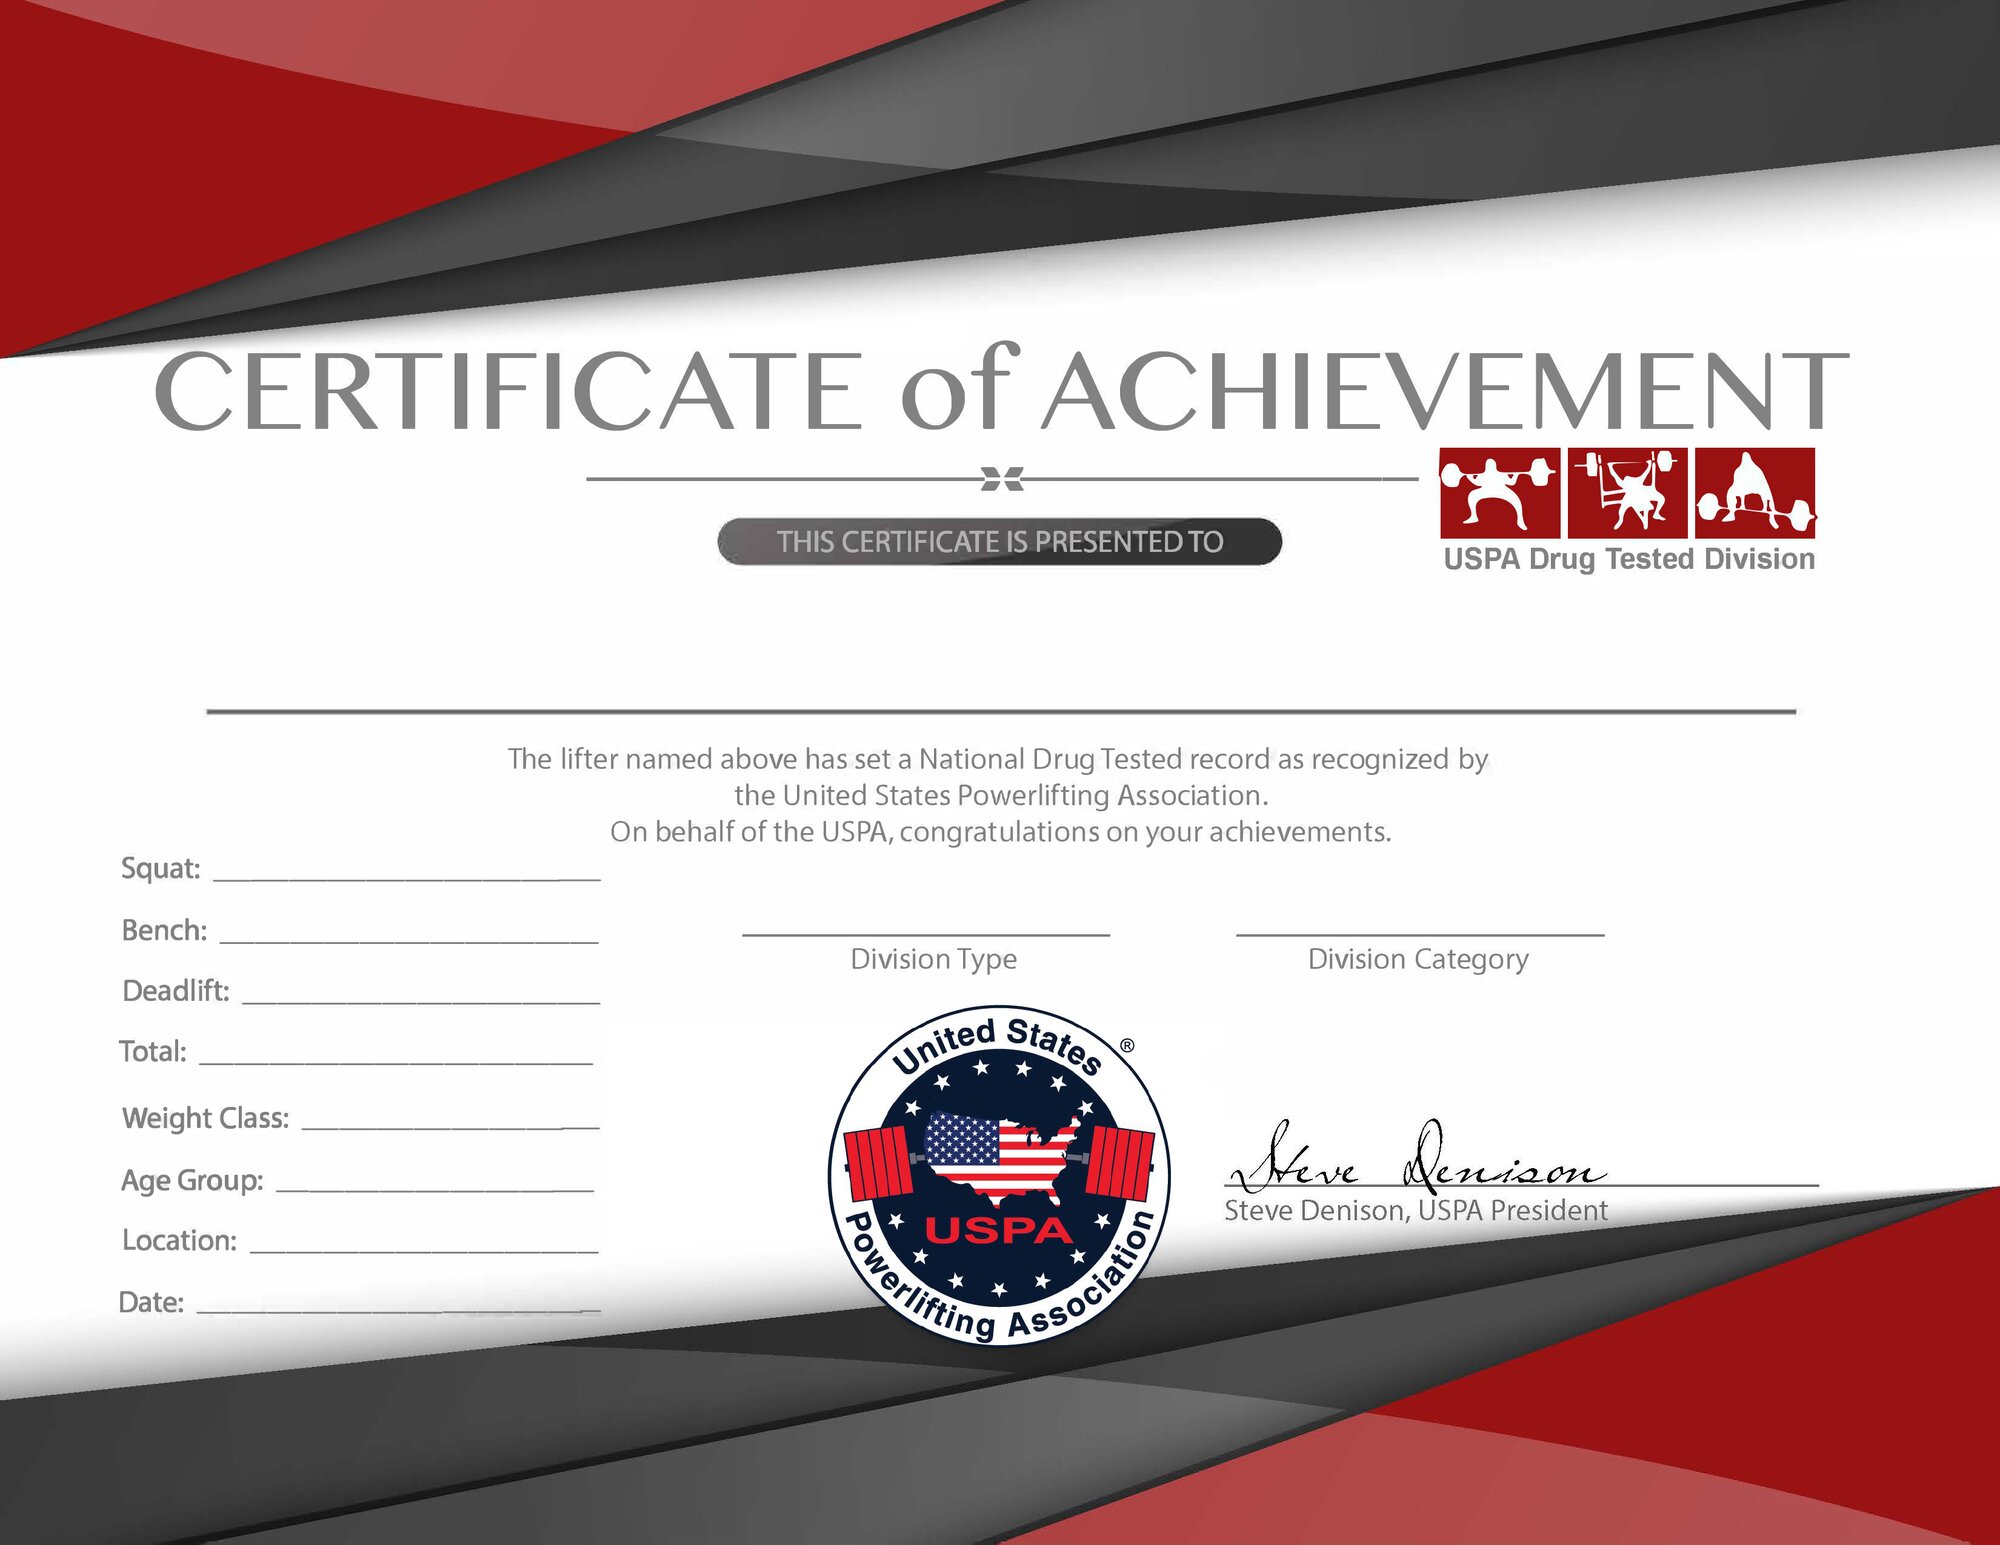 Certificate Background Image